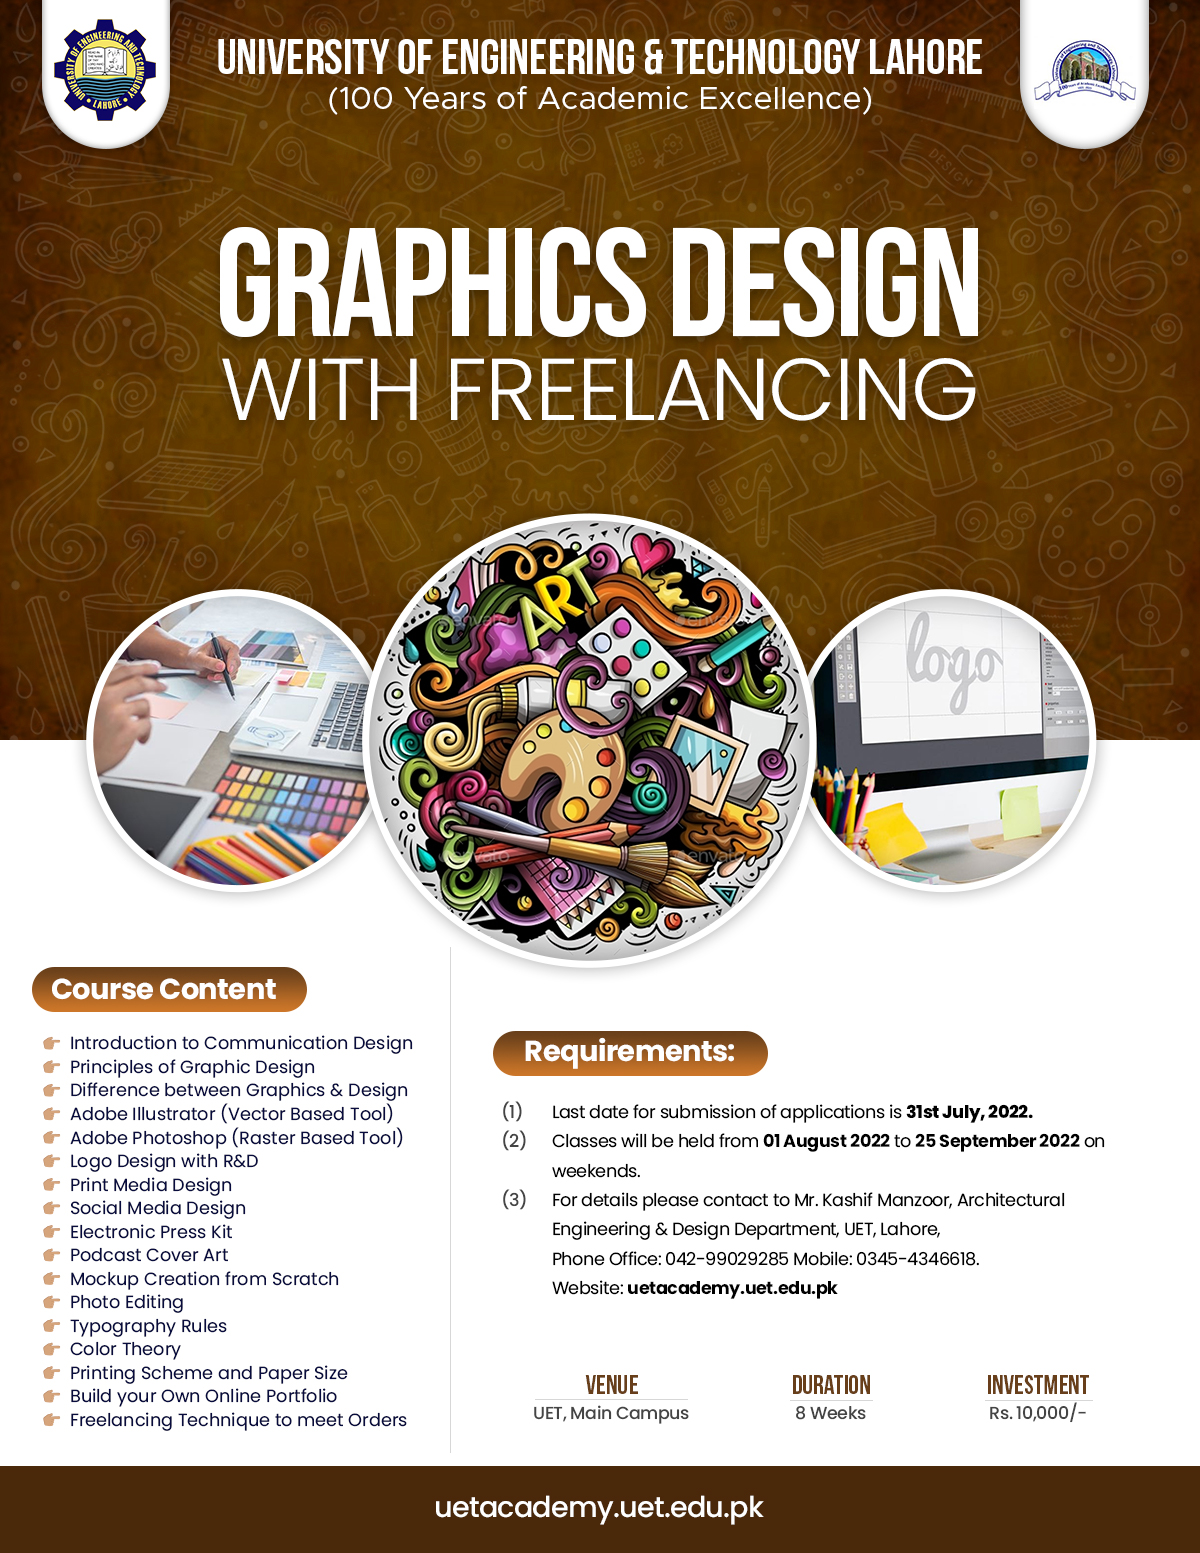 Graphics Design with Freelancing